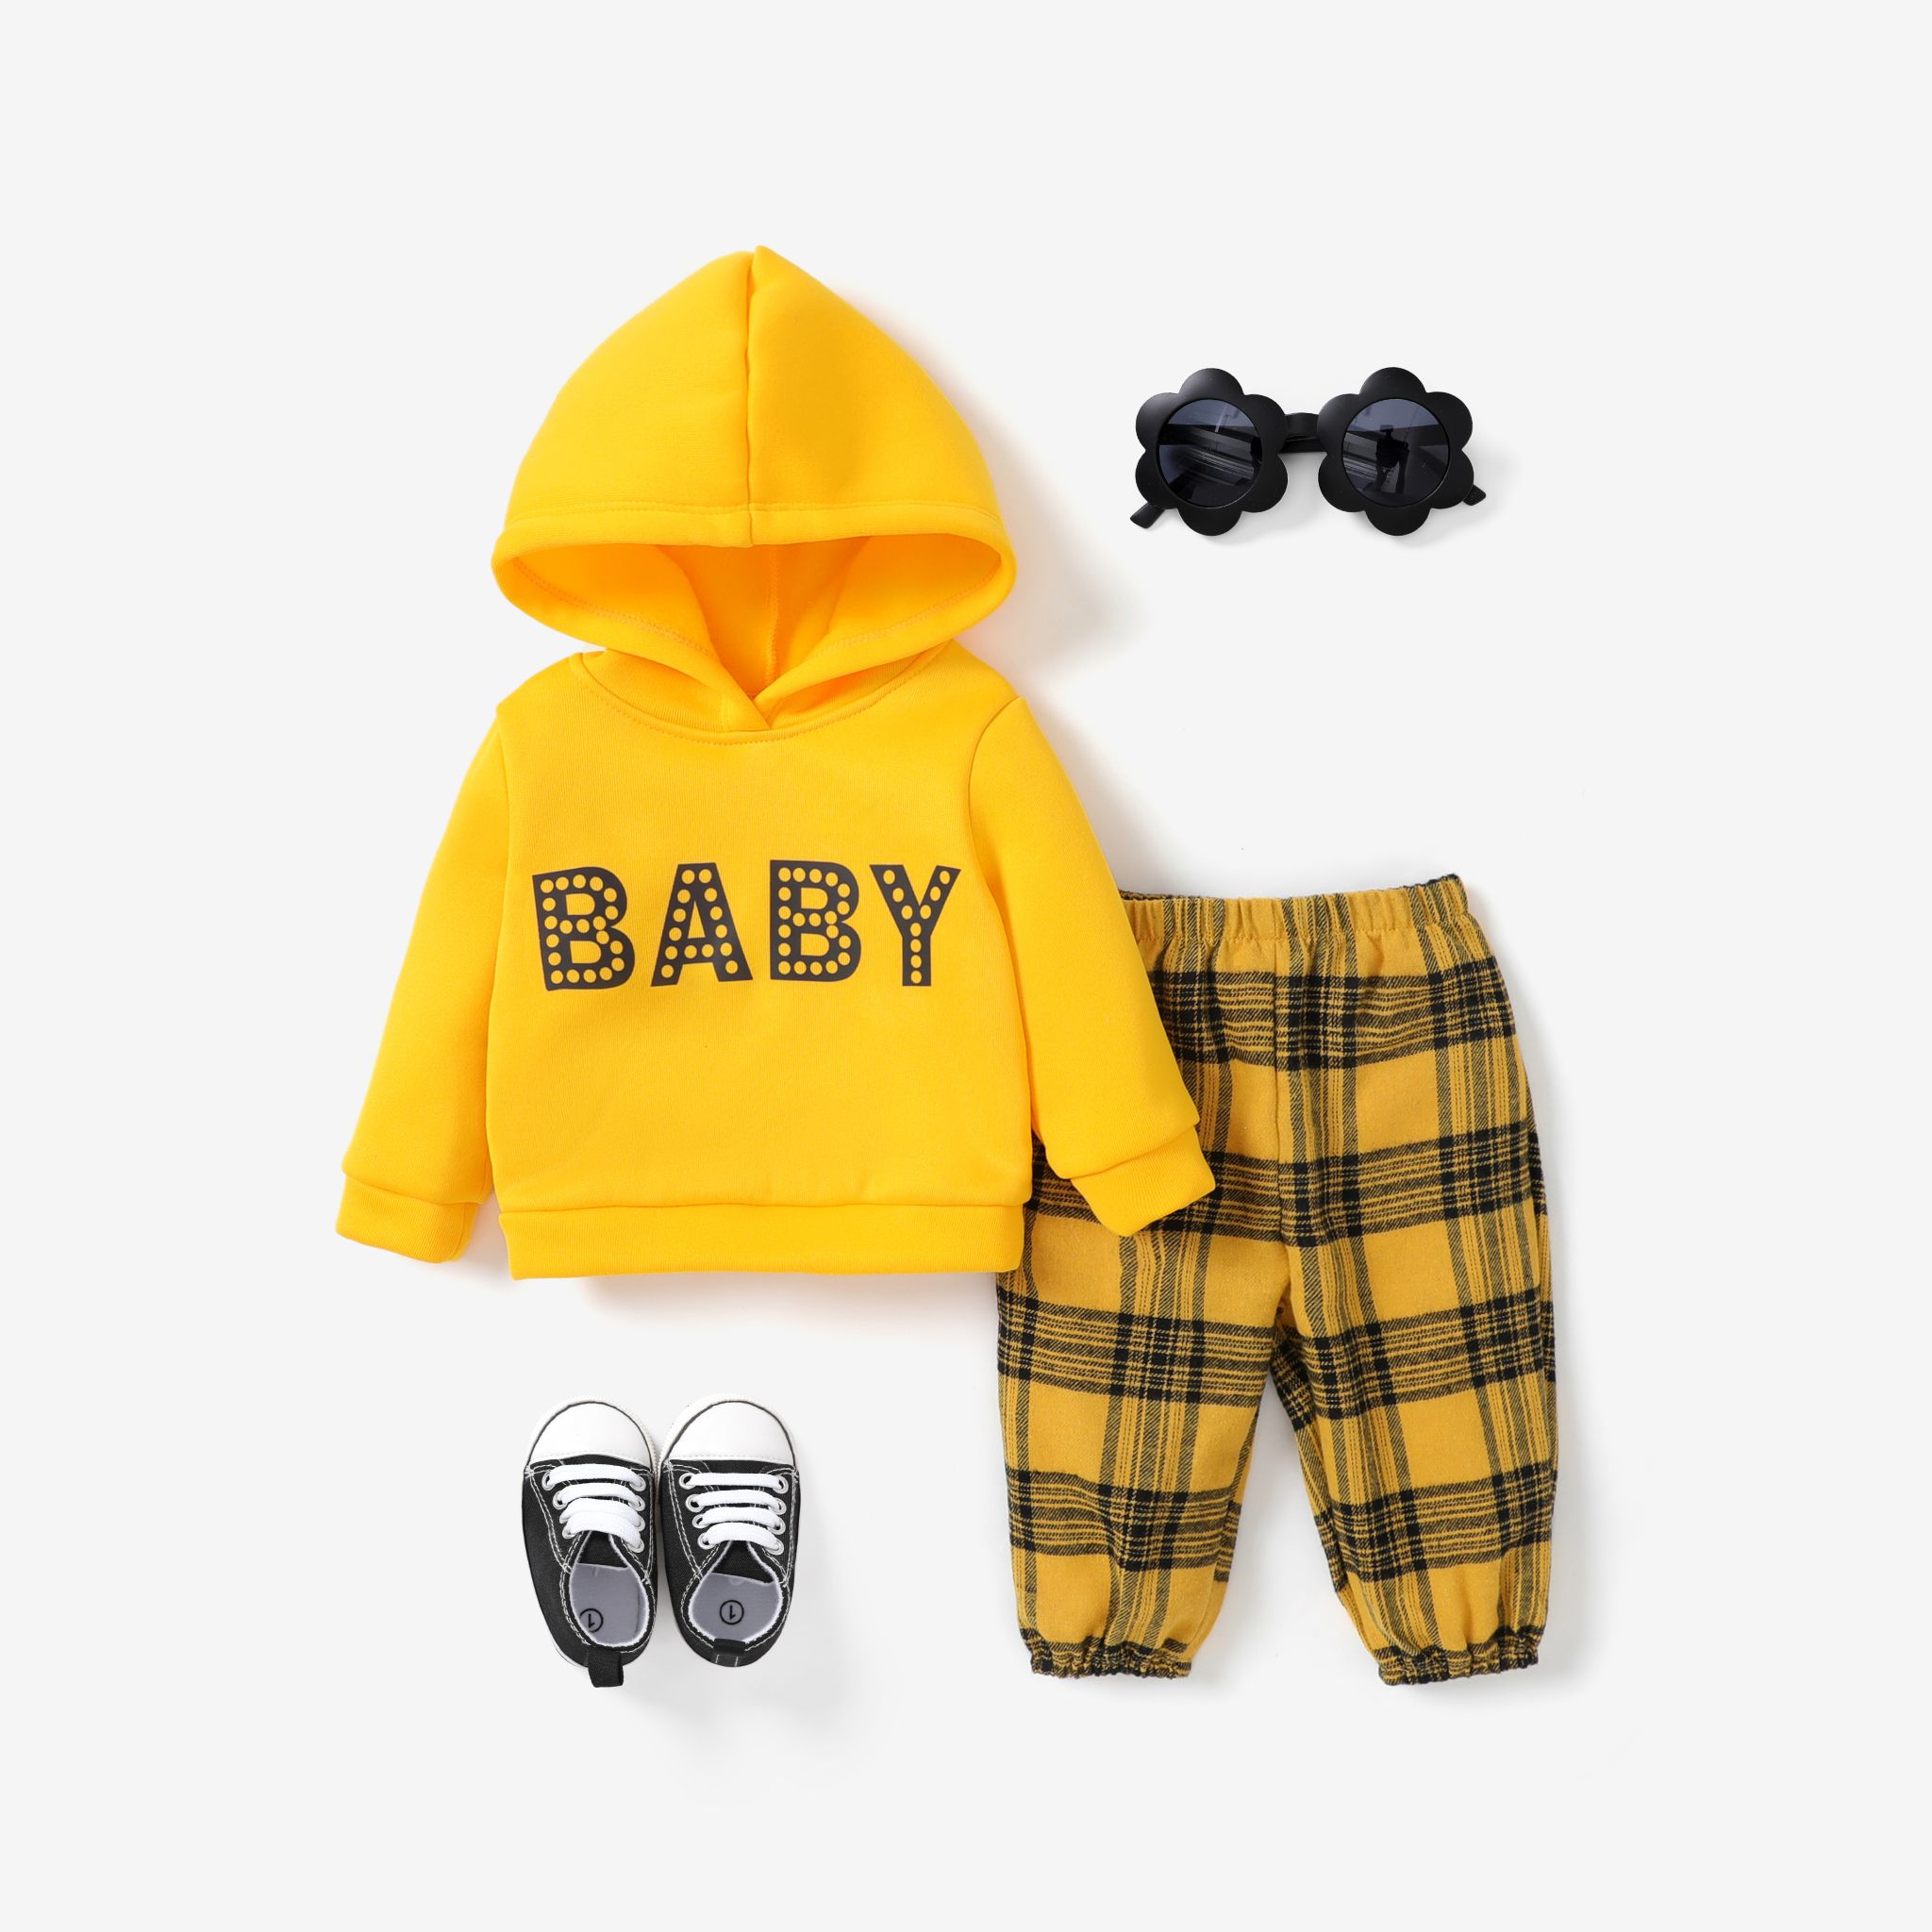 2pcs Baby Girl Bright Color Hooded Set In Avant-garde Style With Letter Pattern